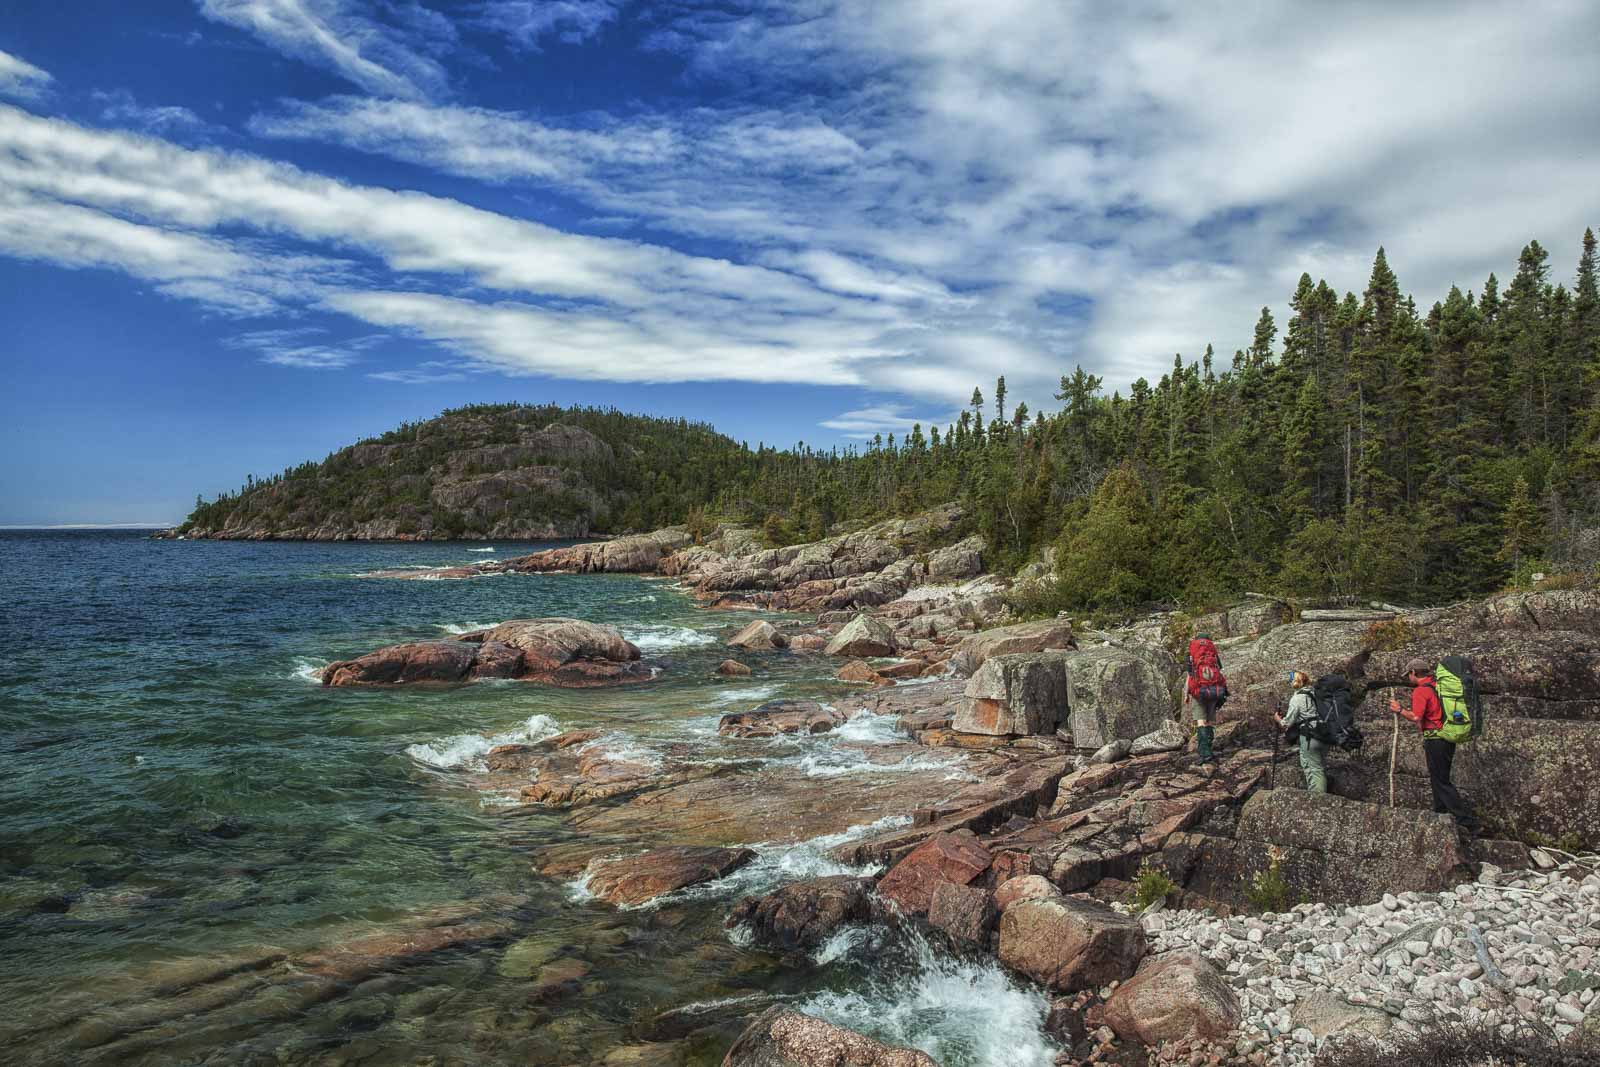 Hiking the Pukaskwa Trail in Ontario